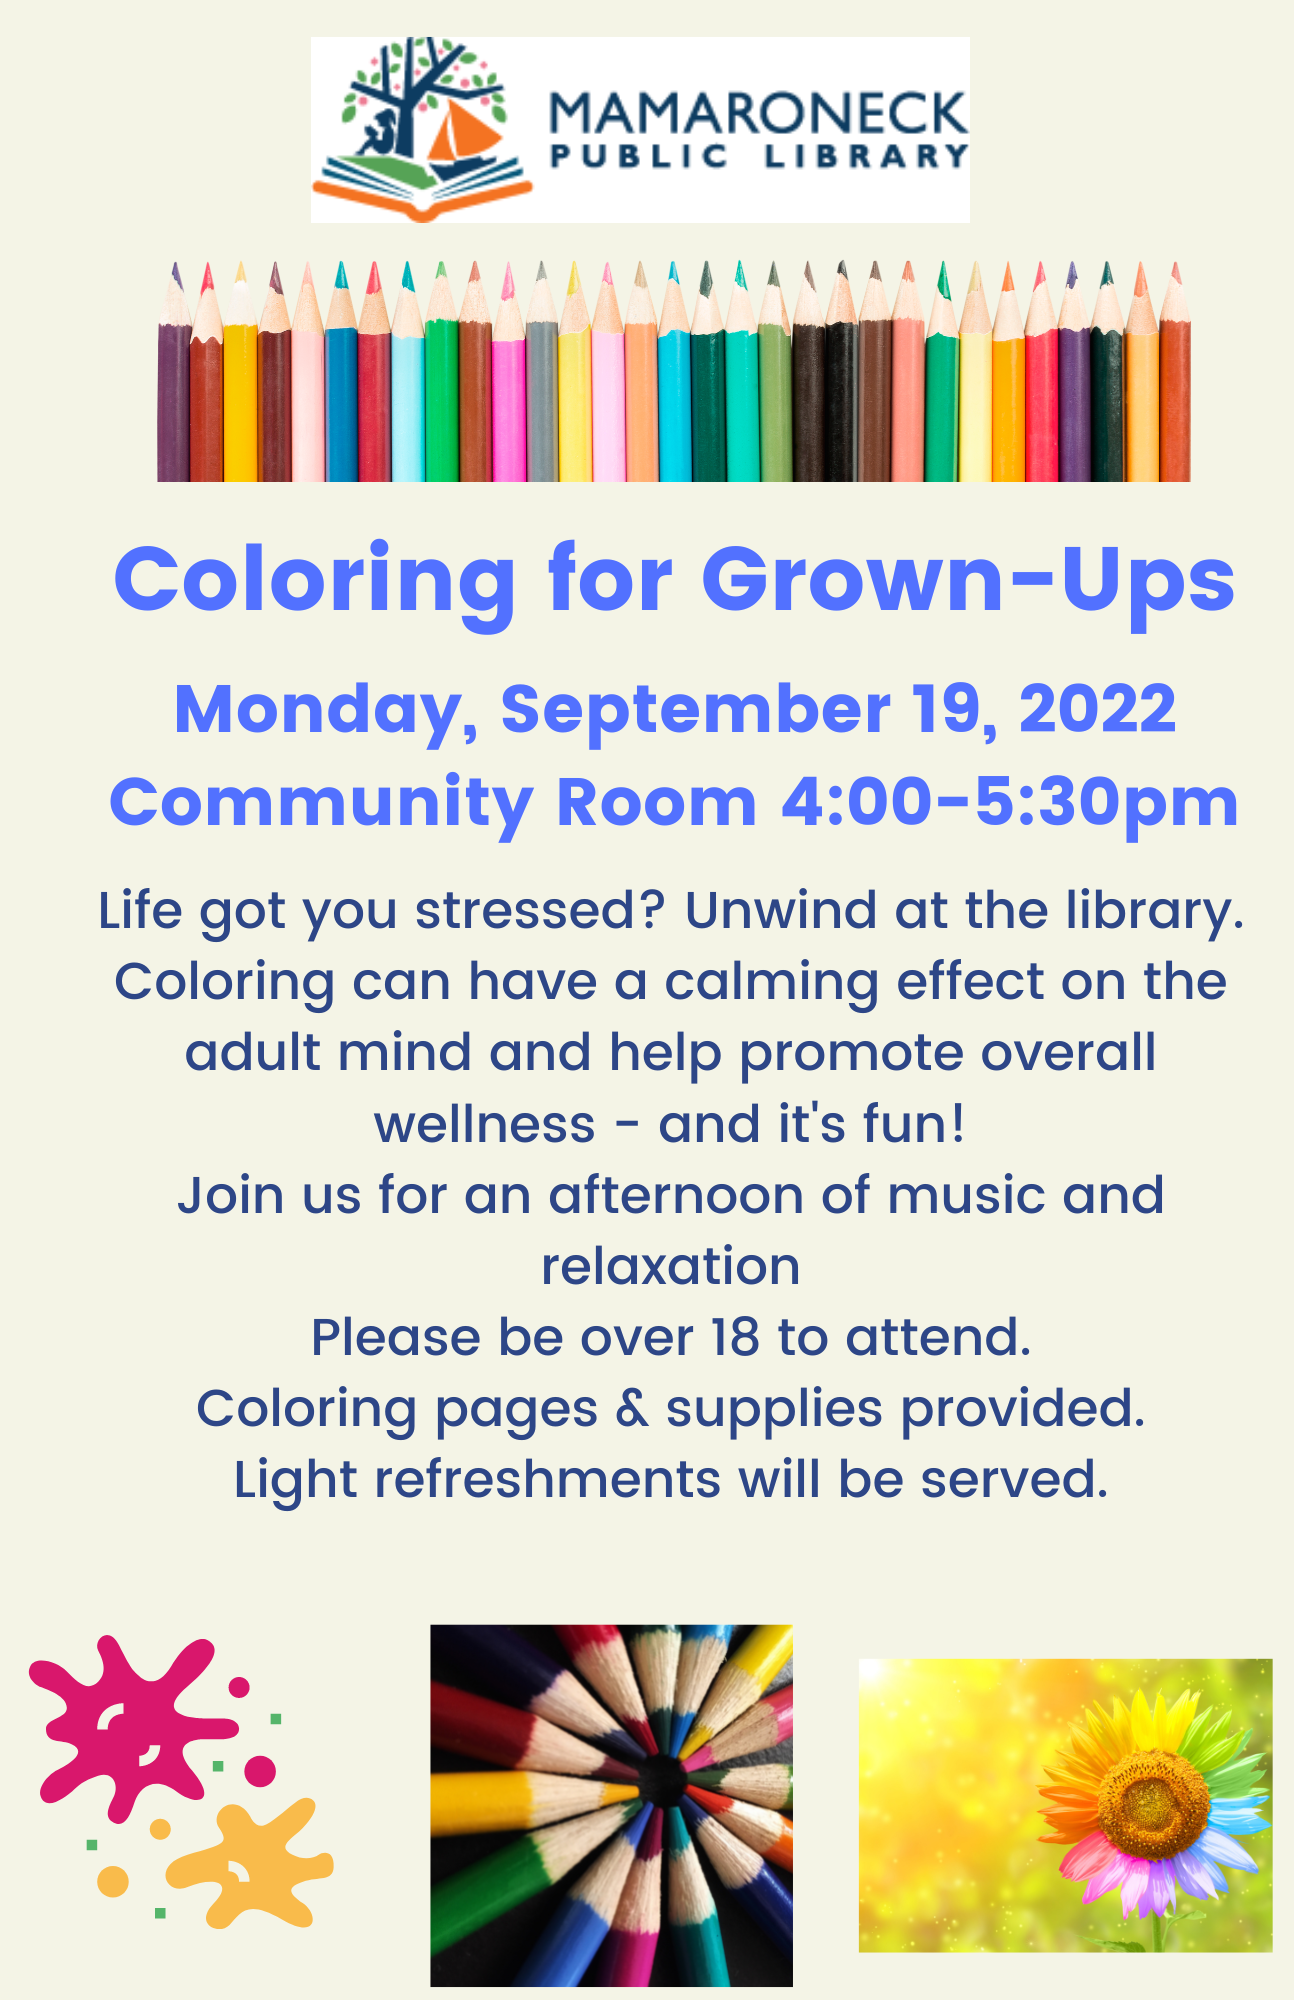 Sept. 19 coloring for grownups